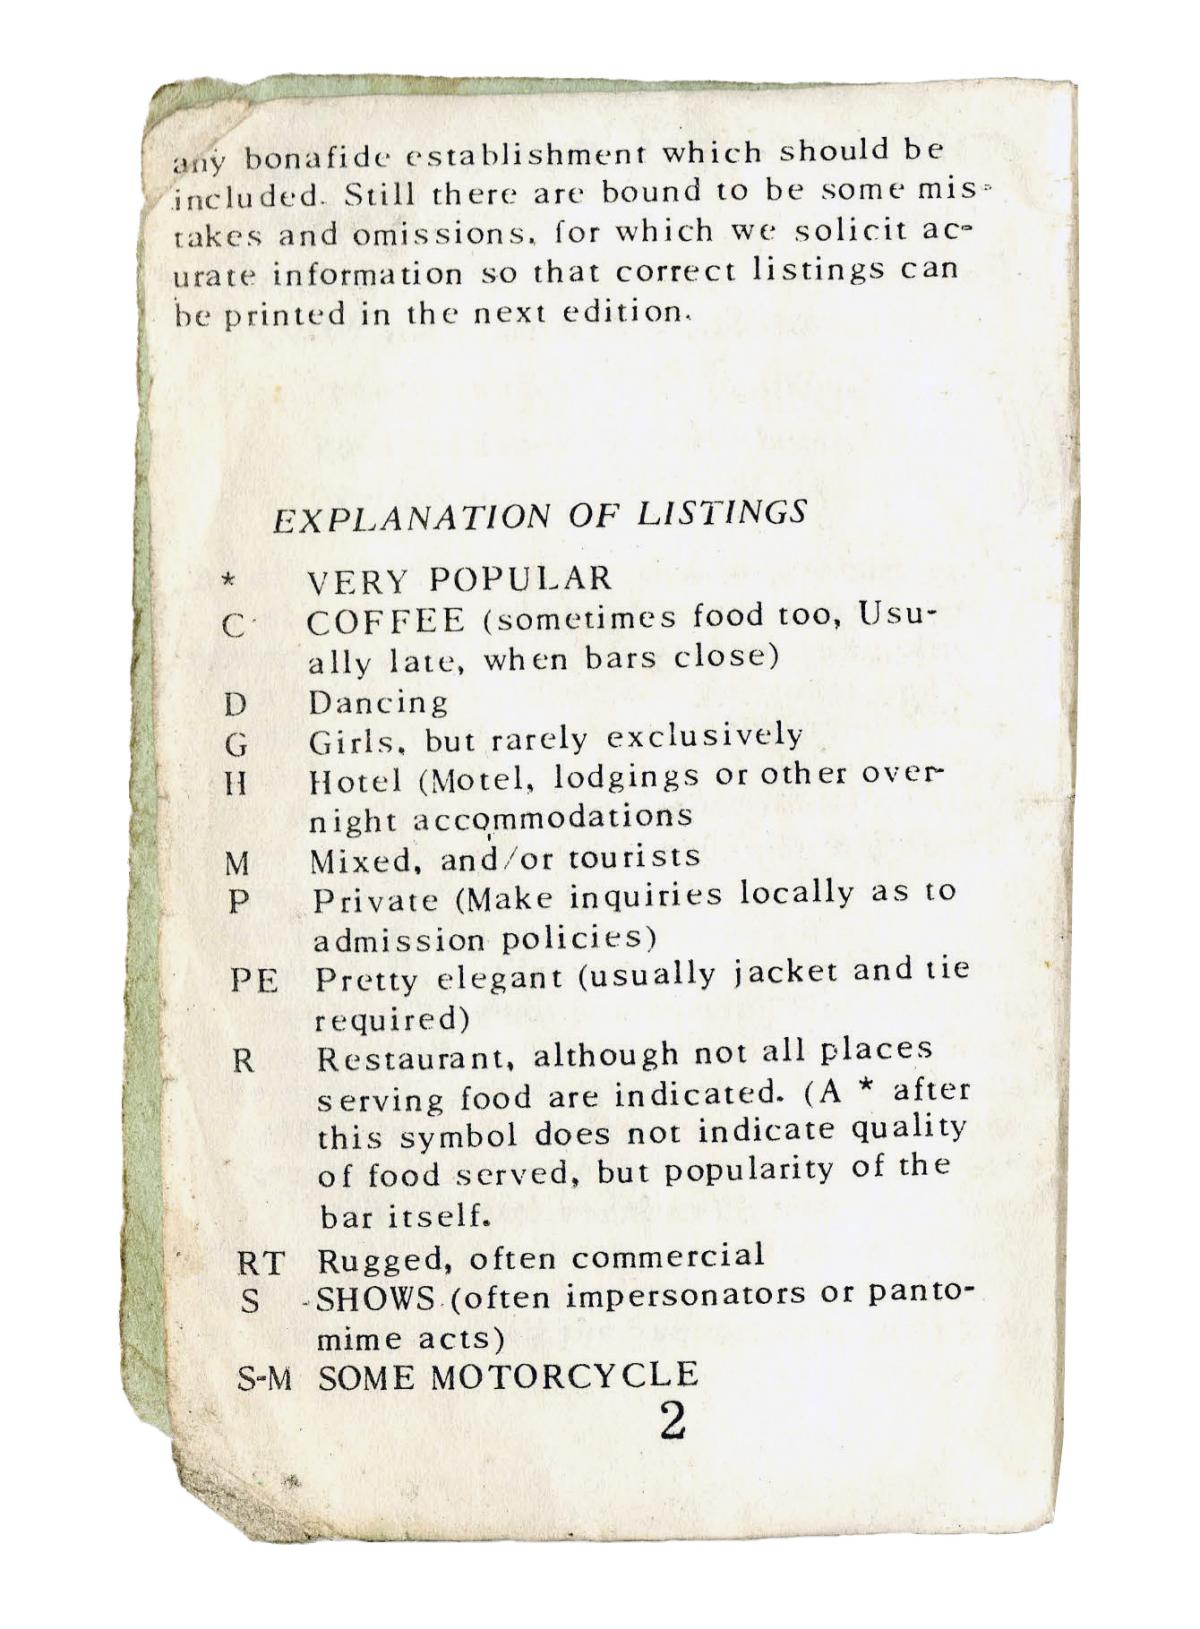 A page from Bob Damron's Address Book with a key to the codes used to describe the guide's listings